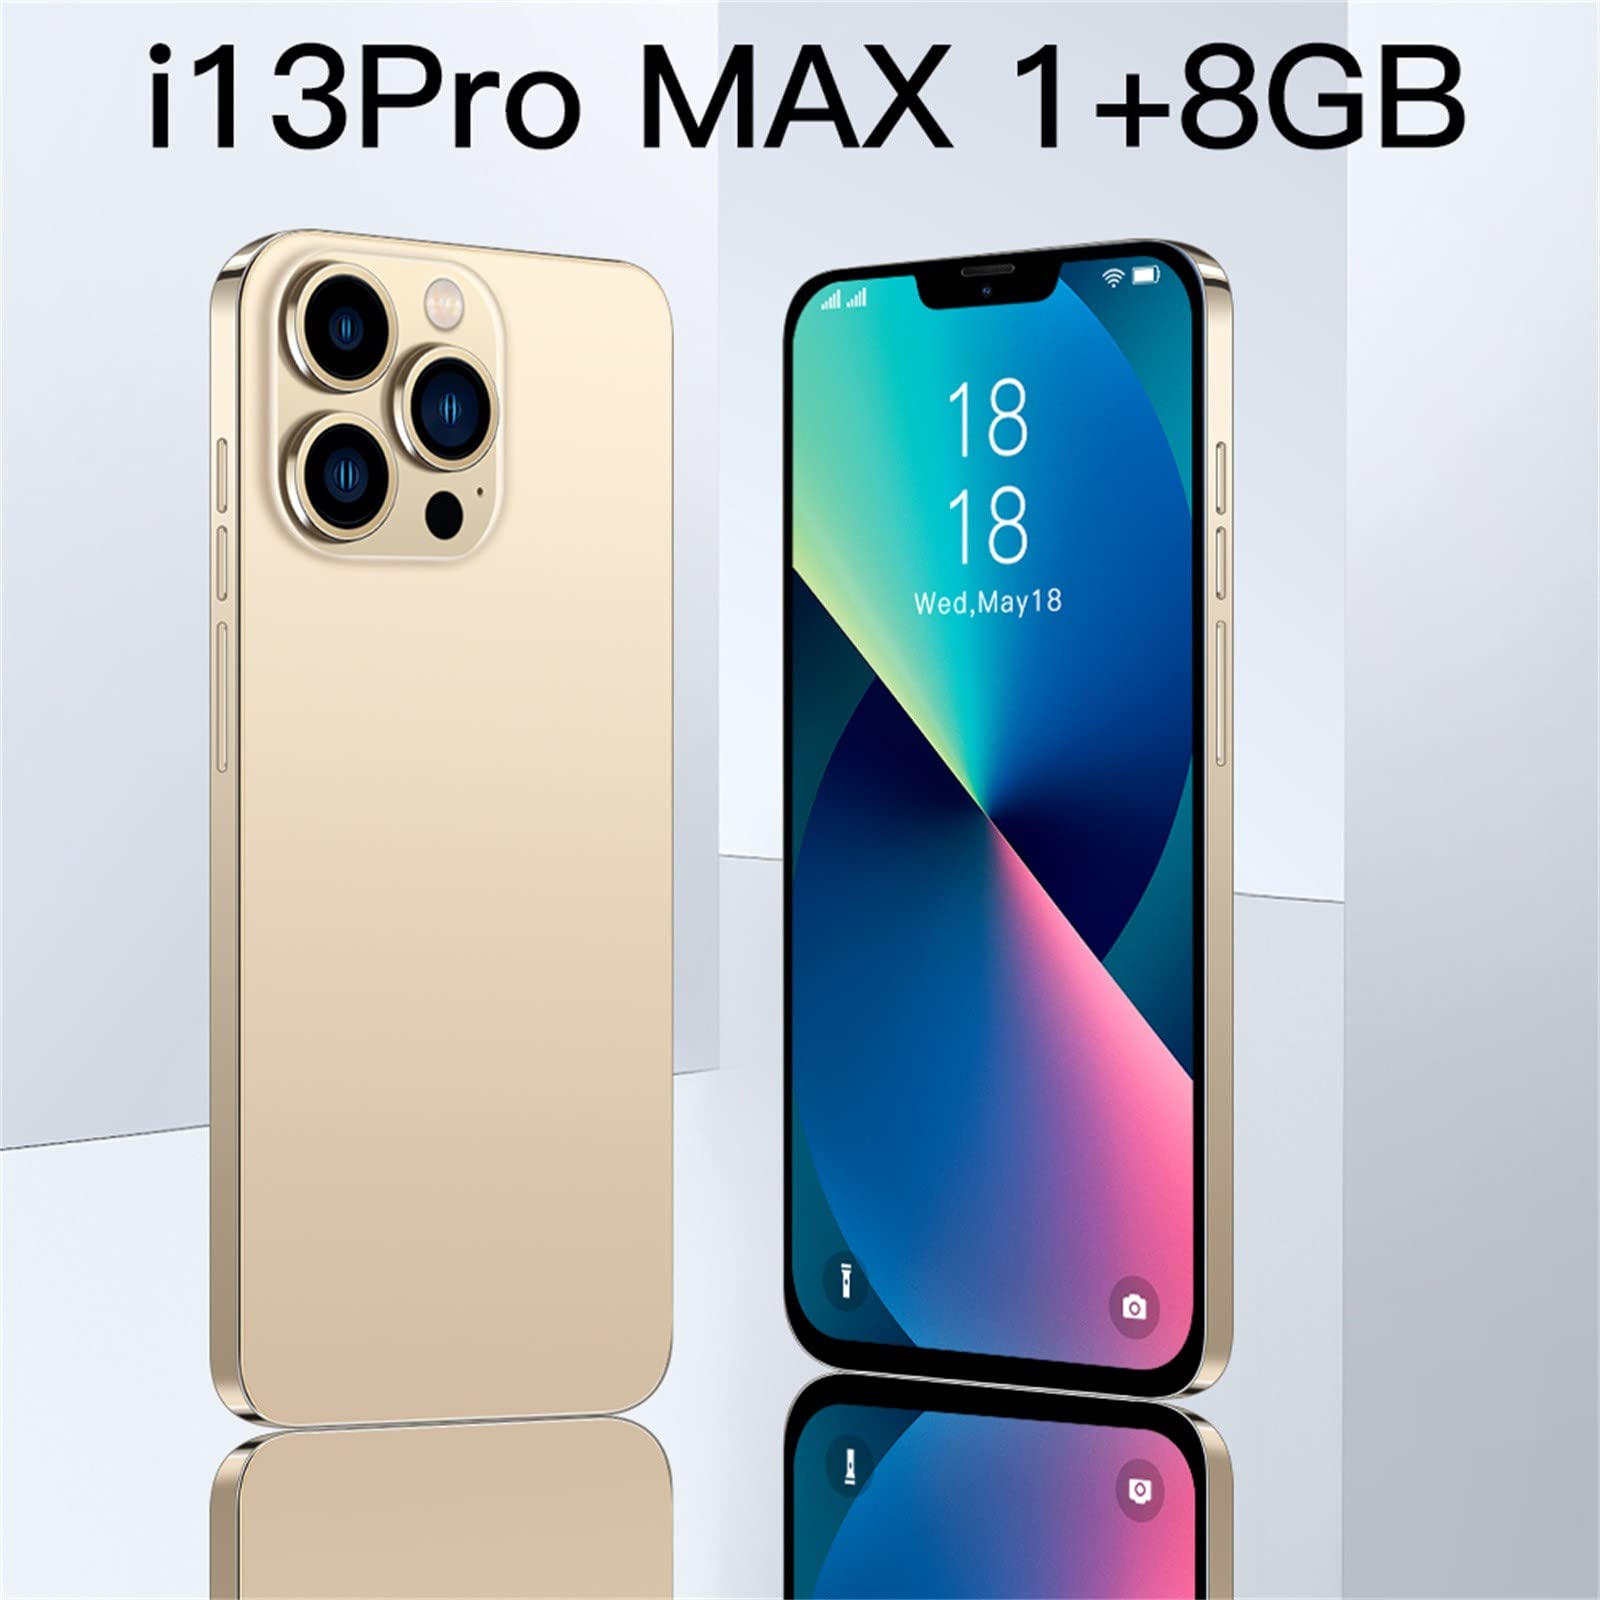 Unlocked Cellphones, Android 6.0 5G Smart Phone, 1+8GB RAM, 6.3inch HD Full Screen Dual SIM Card Mobile Face ID Smartphones for Father Mother Birthdays Gift, 2800mAh Battery, Gold